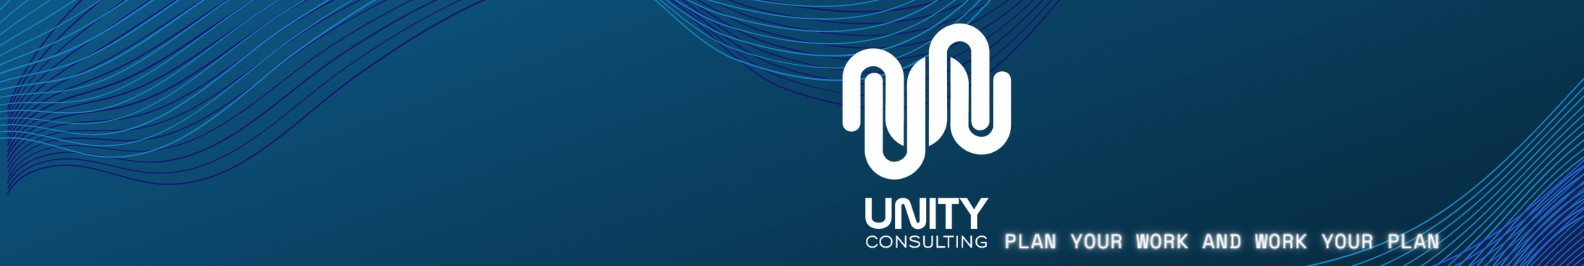 UNITY CONSULTING background